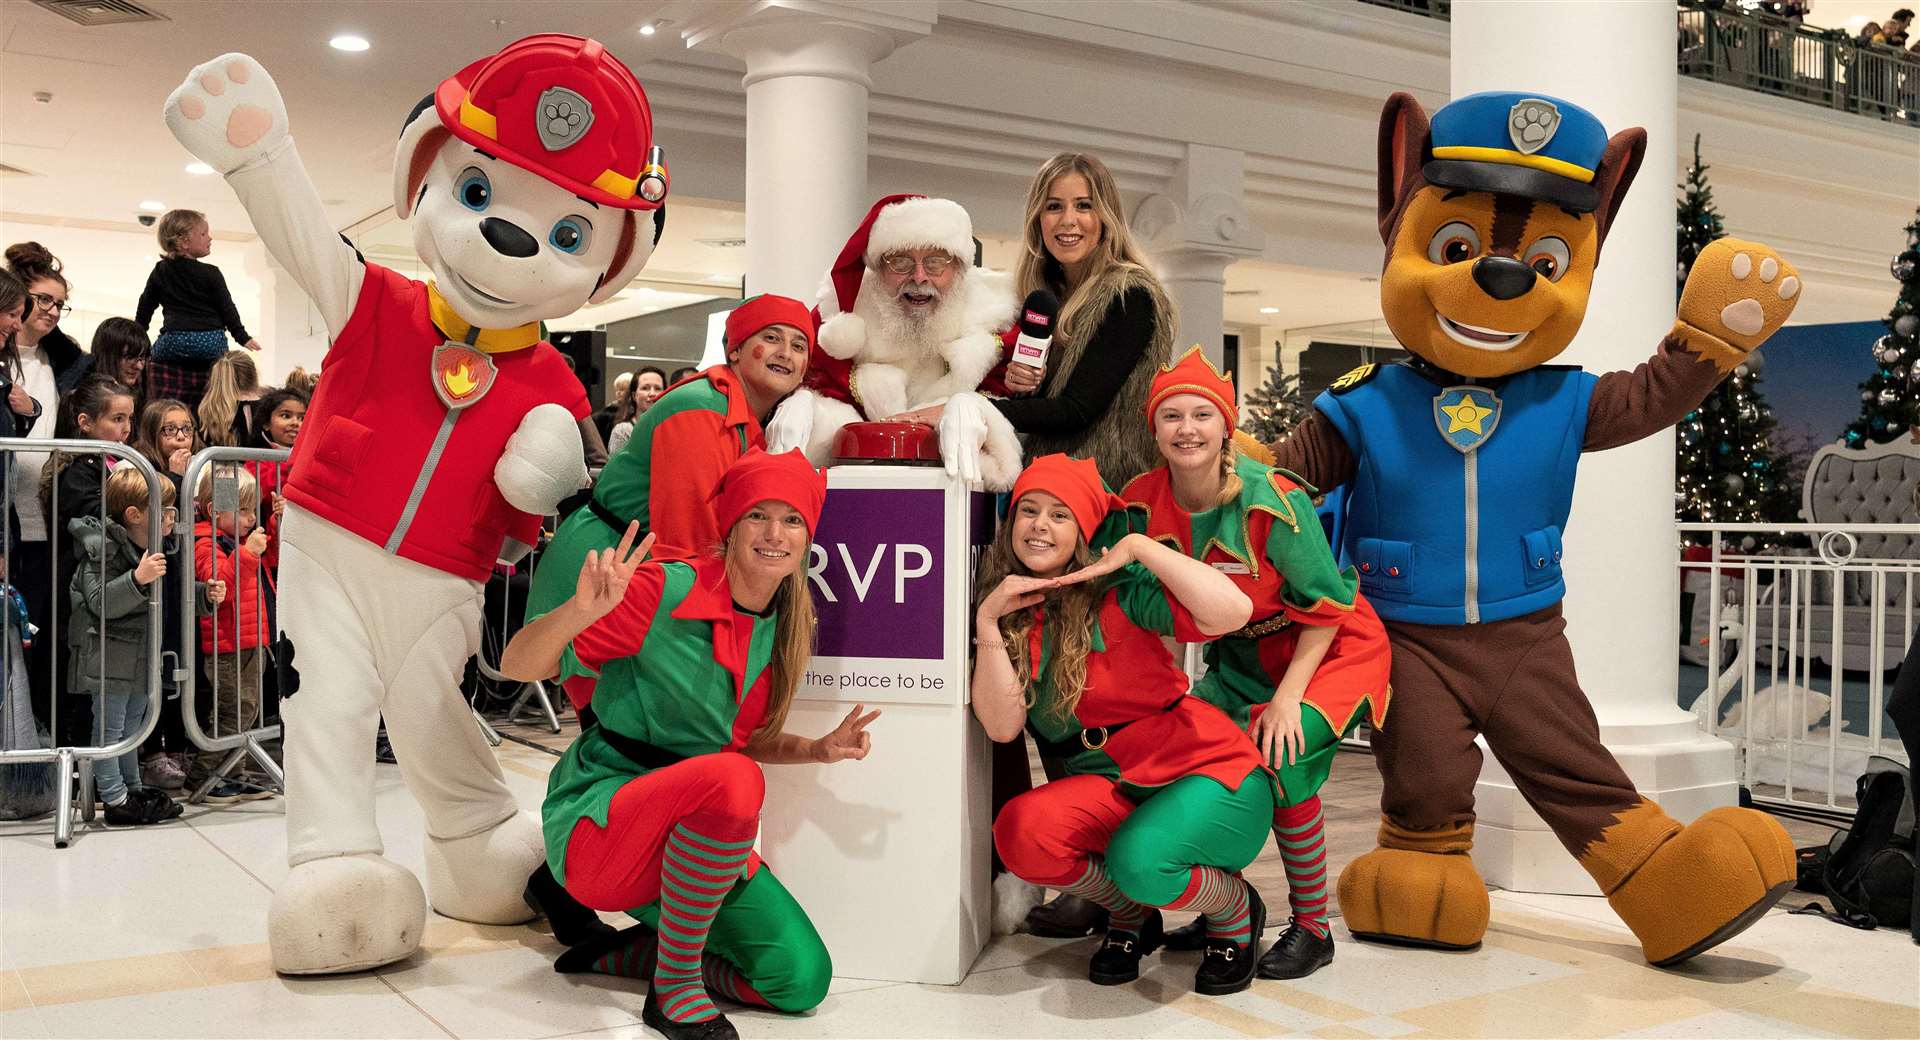 Tunbridge Wells Victoria Place switch on with Santa, Laura from kmfm and PAW Patrol